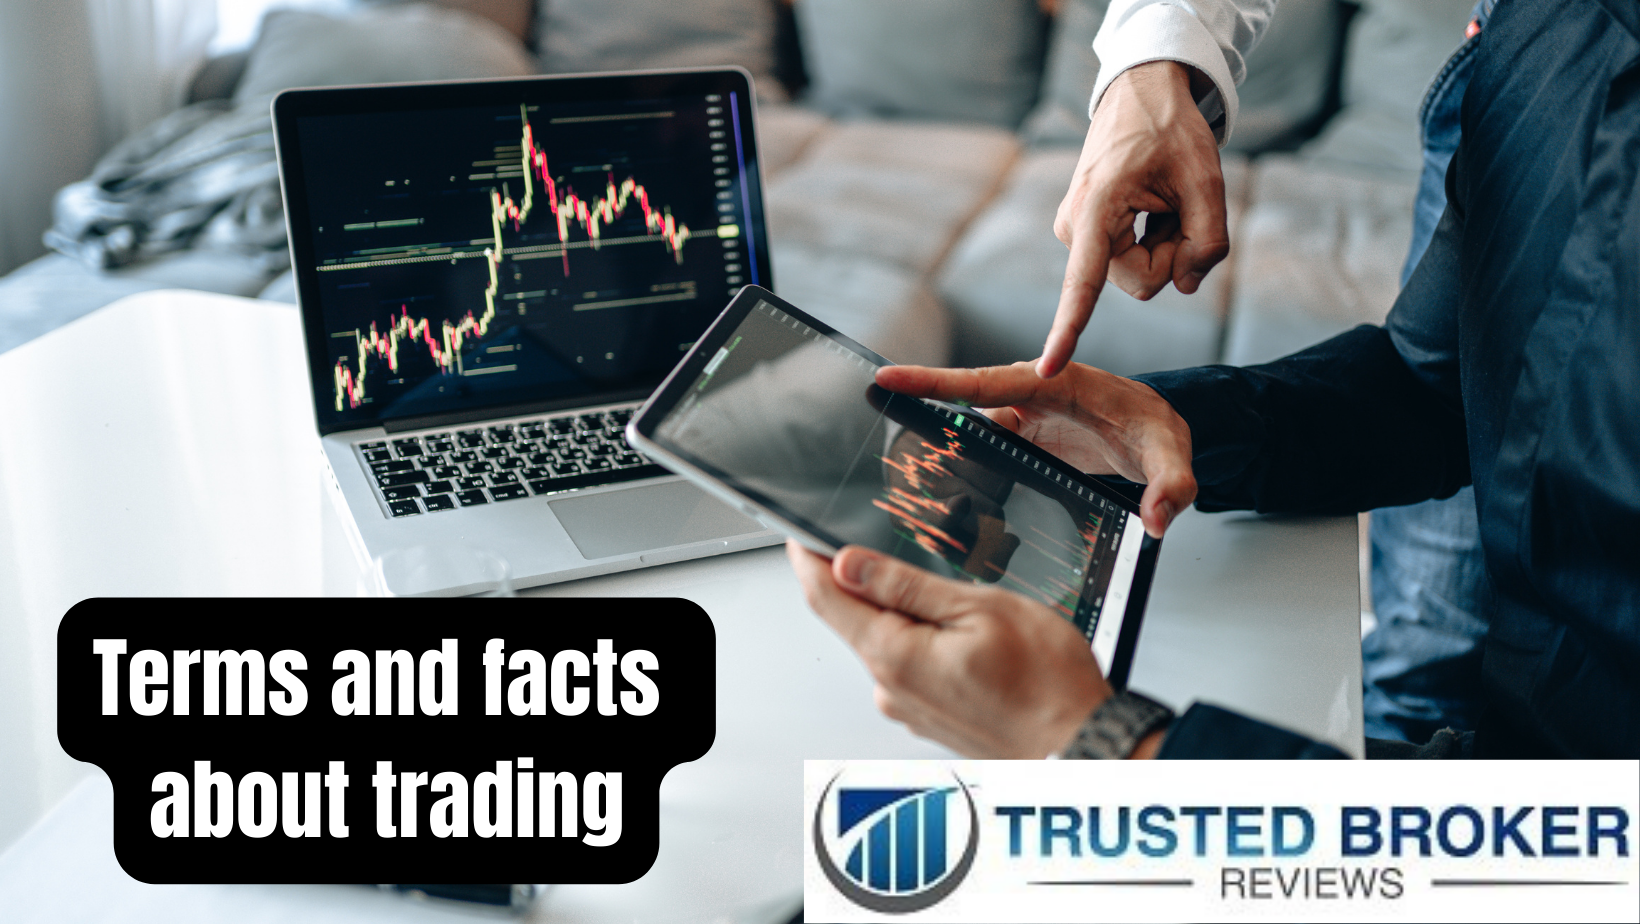 Terms and facts of trading platforms for beginners